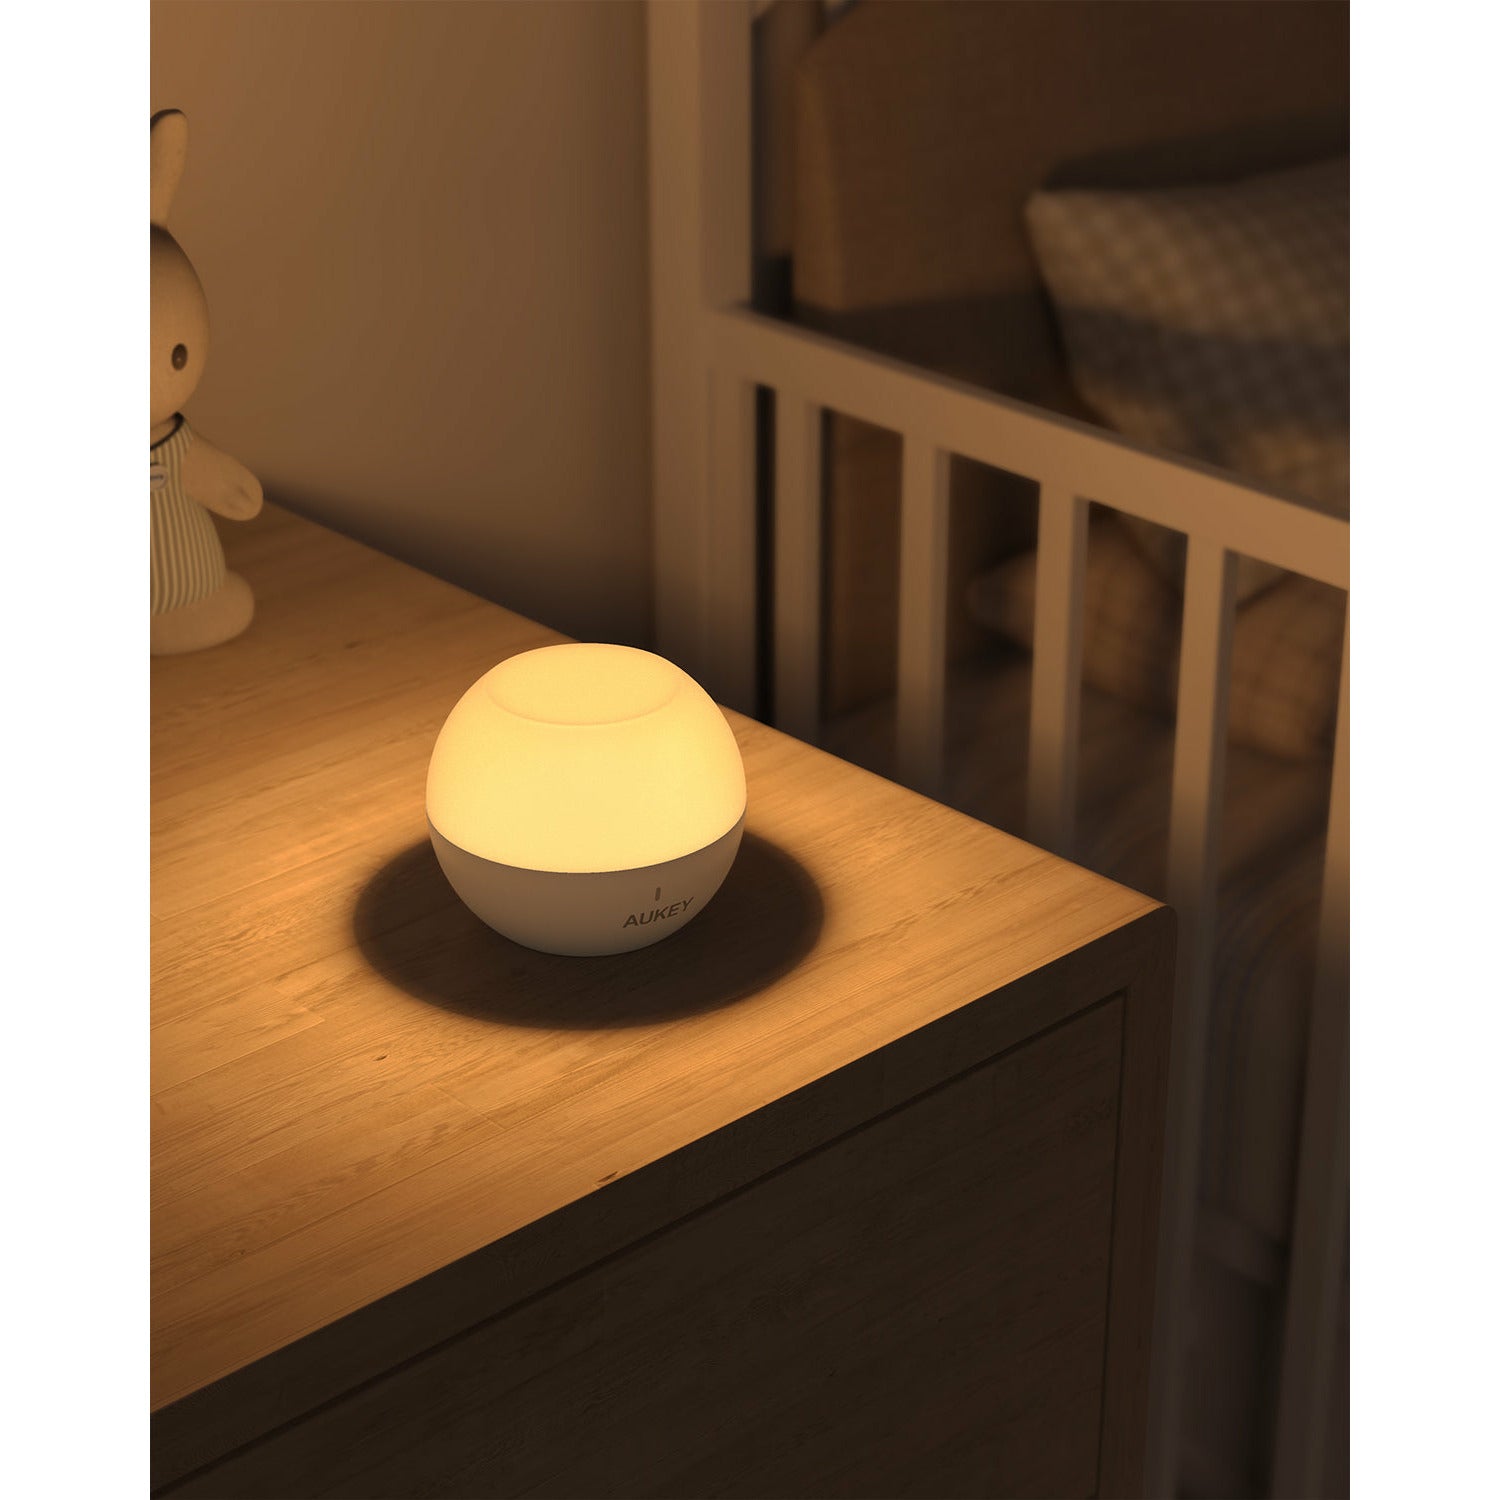 AUKEY LT-ST23 Mini RGB Table Lamp Touch Control